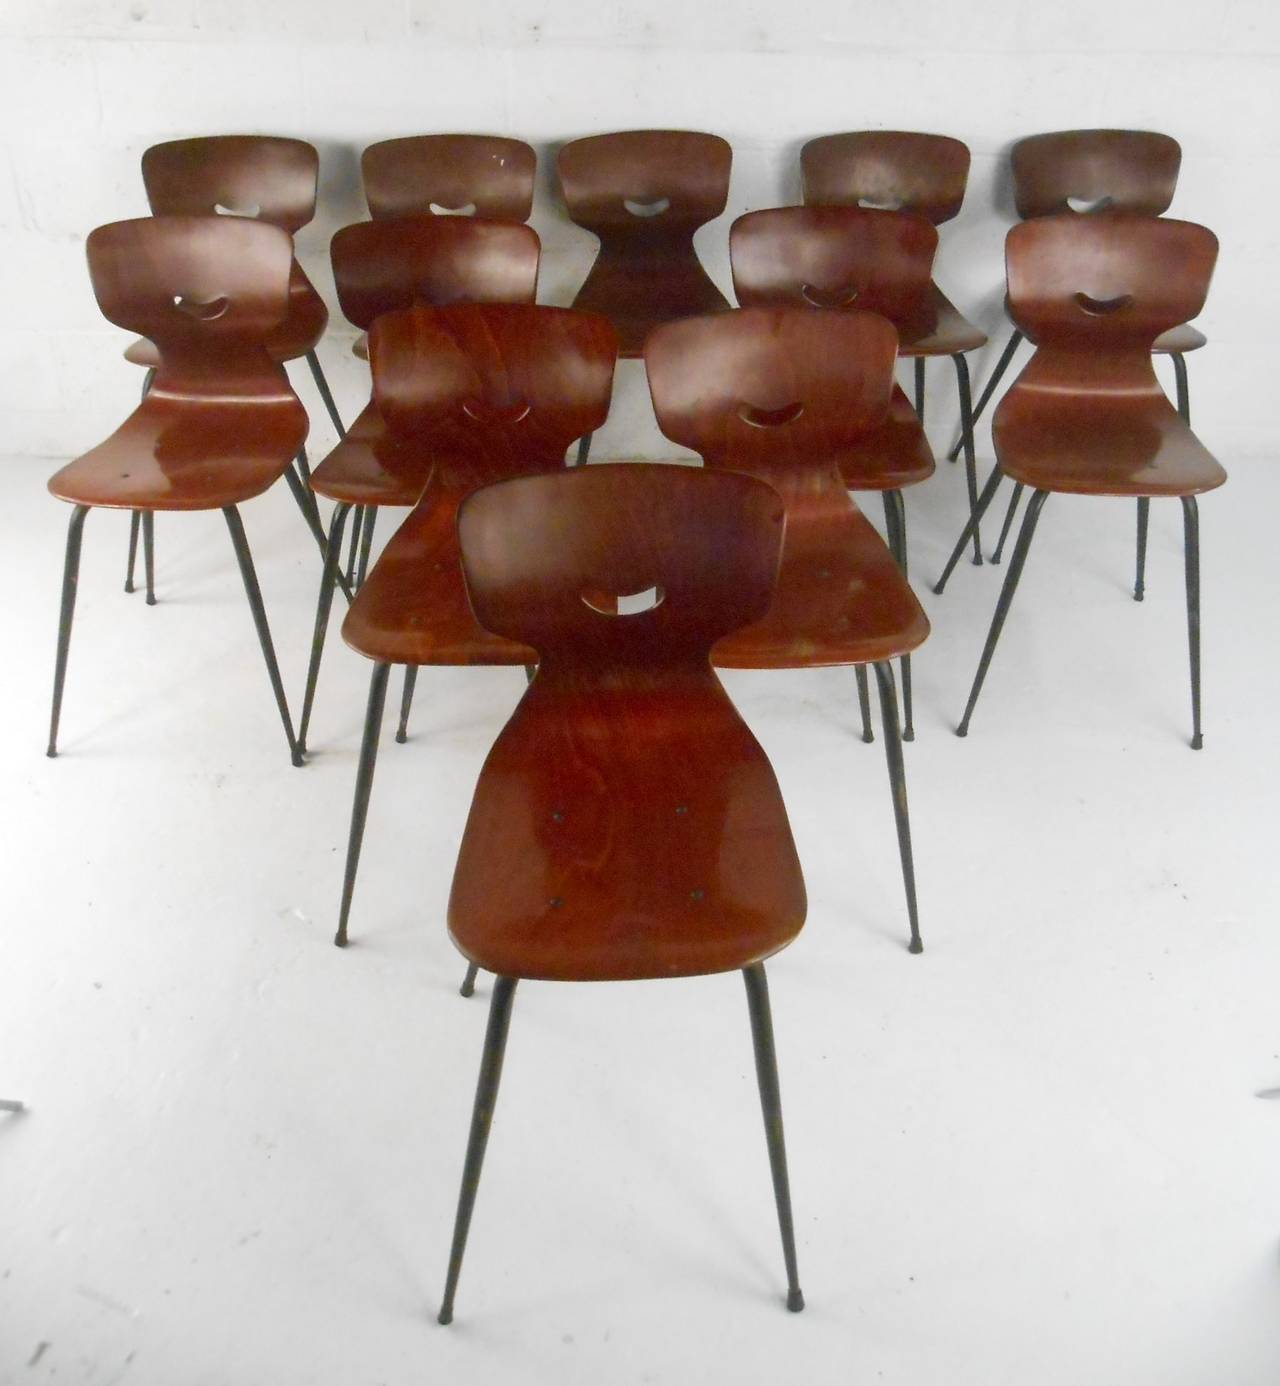 Beautiful industrial strength molded chairs designed by Adam Stegner. Made from strong Pagwood shaped seats (Pagwood is high density laminated compressed wood, with orthopedic pelvic and back support without adjustment), set on strong iron tapered